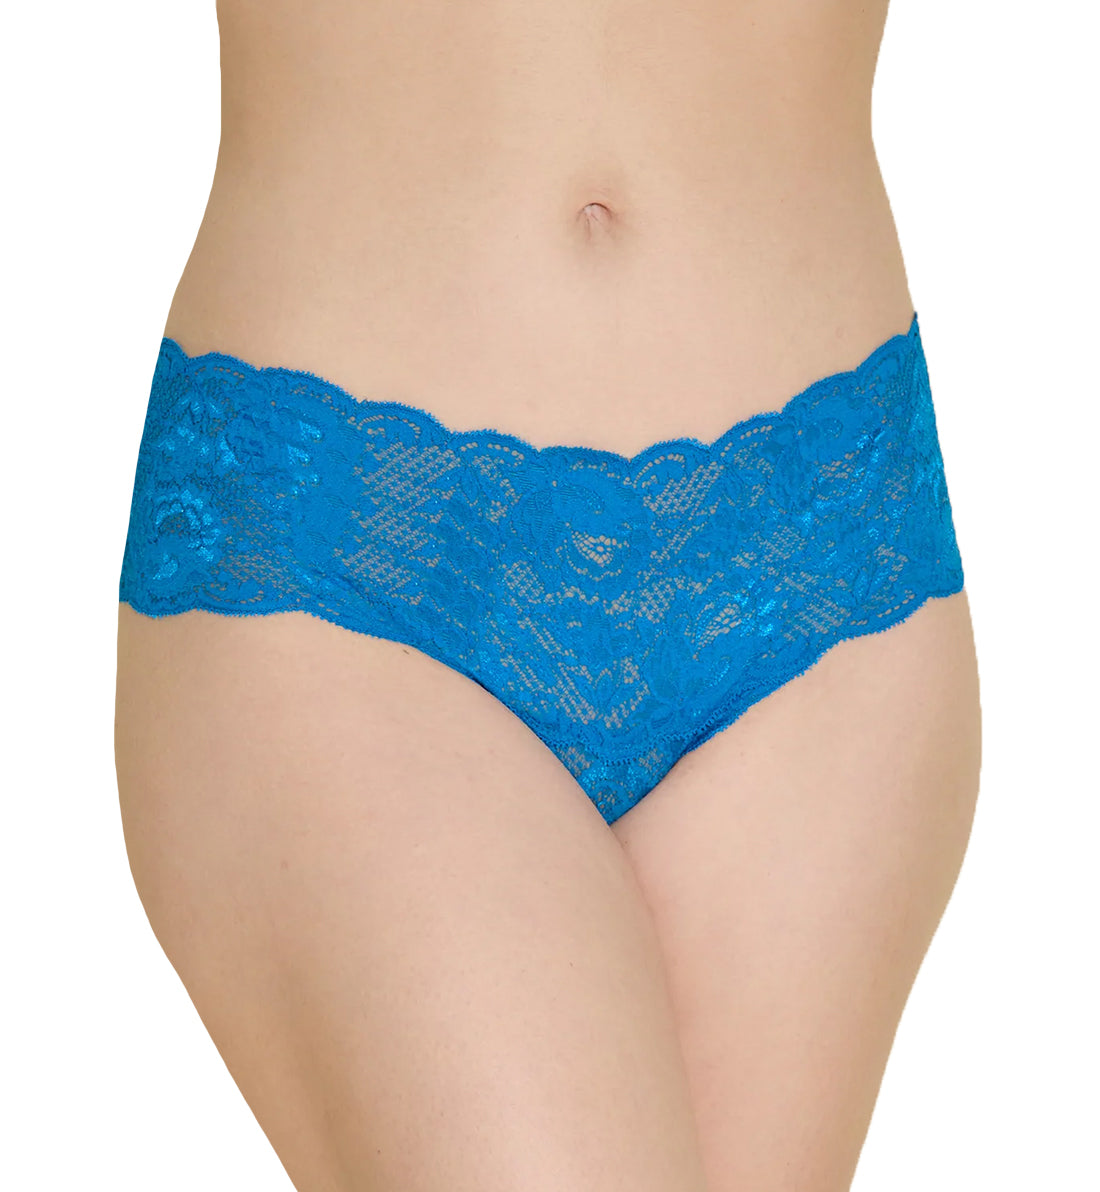 Cosabella Never Say Never Comfie Thong (NEVER0343),S/M,Udaipur Blue - Udaipur Blue,S/M